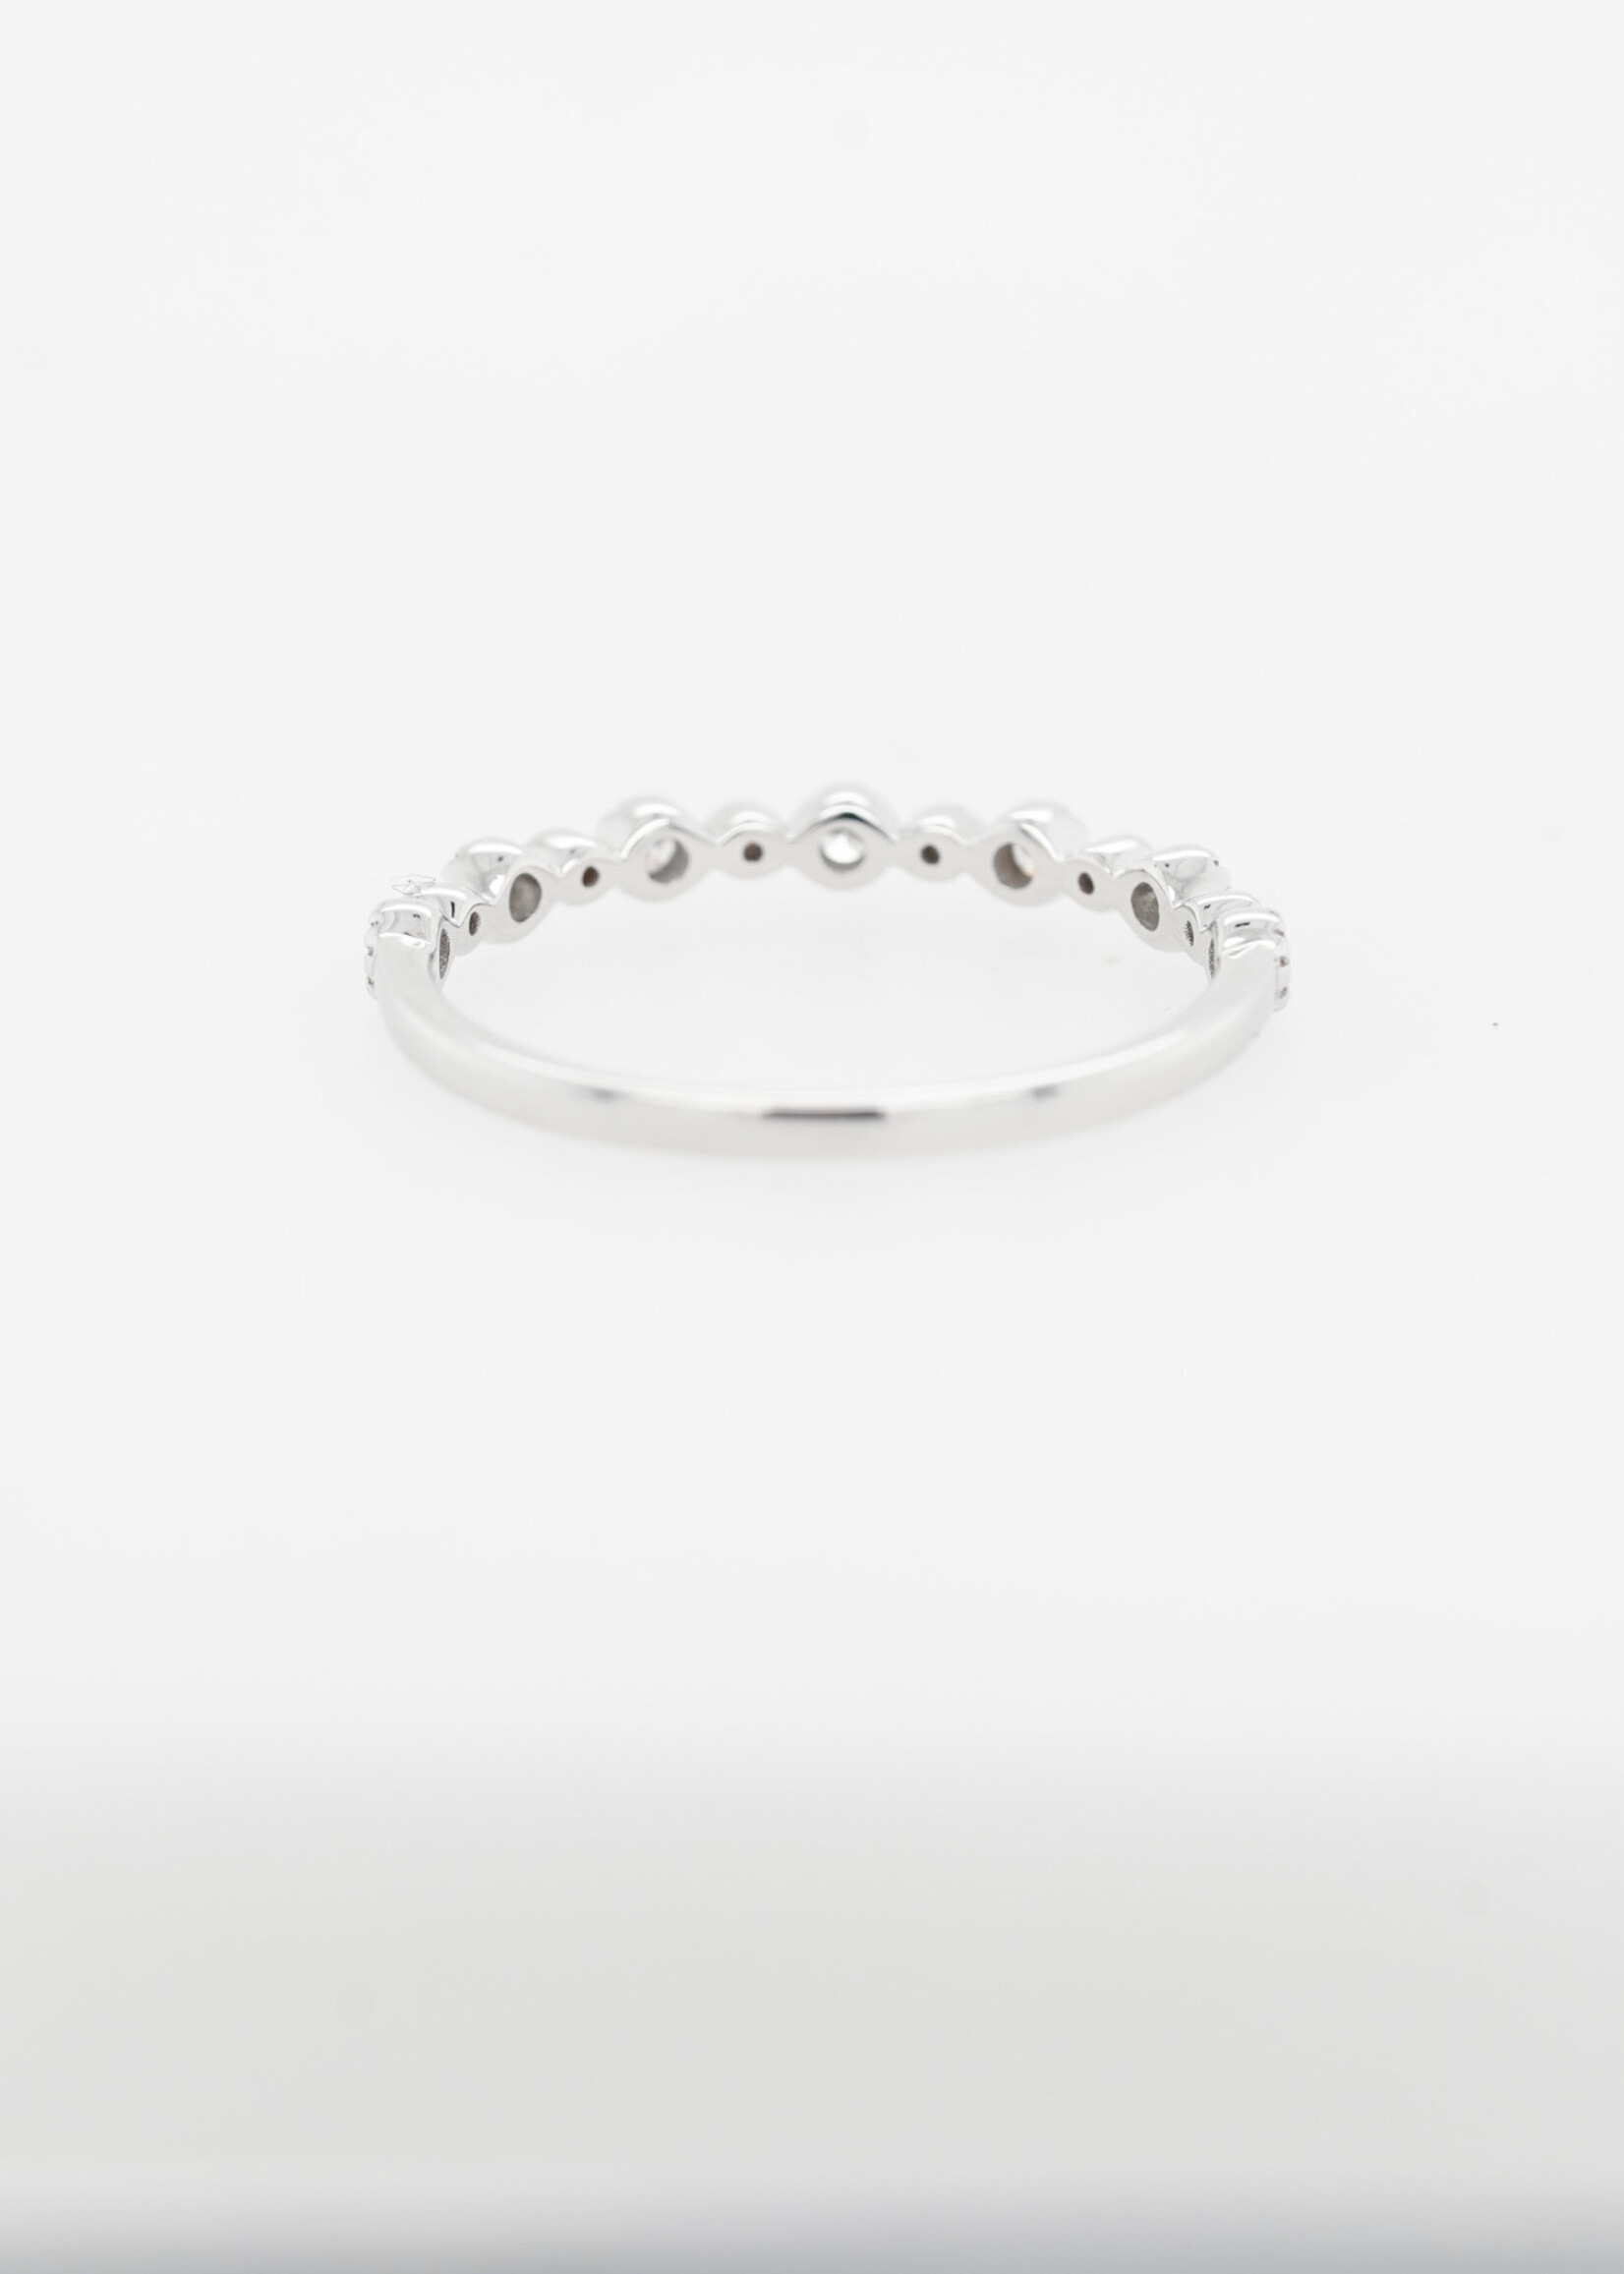 18KW 1.4g .17ctw Diamond Stackable Band (size 6.75)